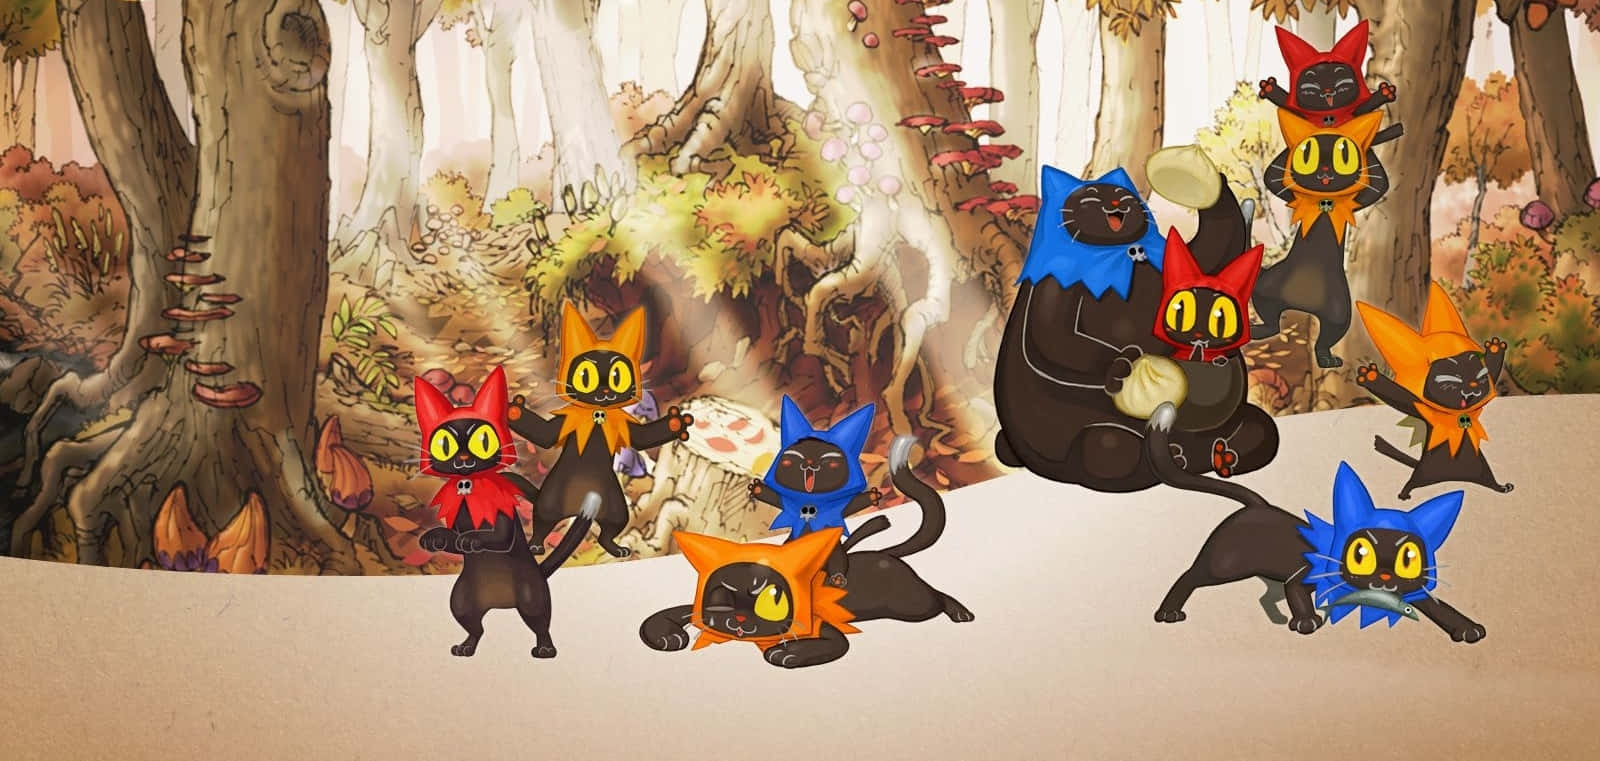 A Group Of Cats In A Forest Wallpaper